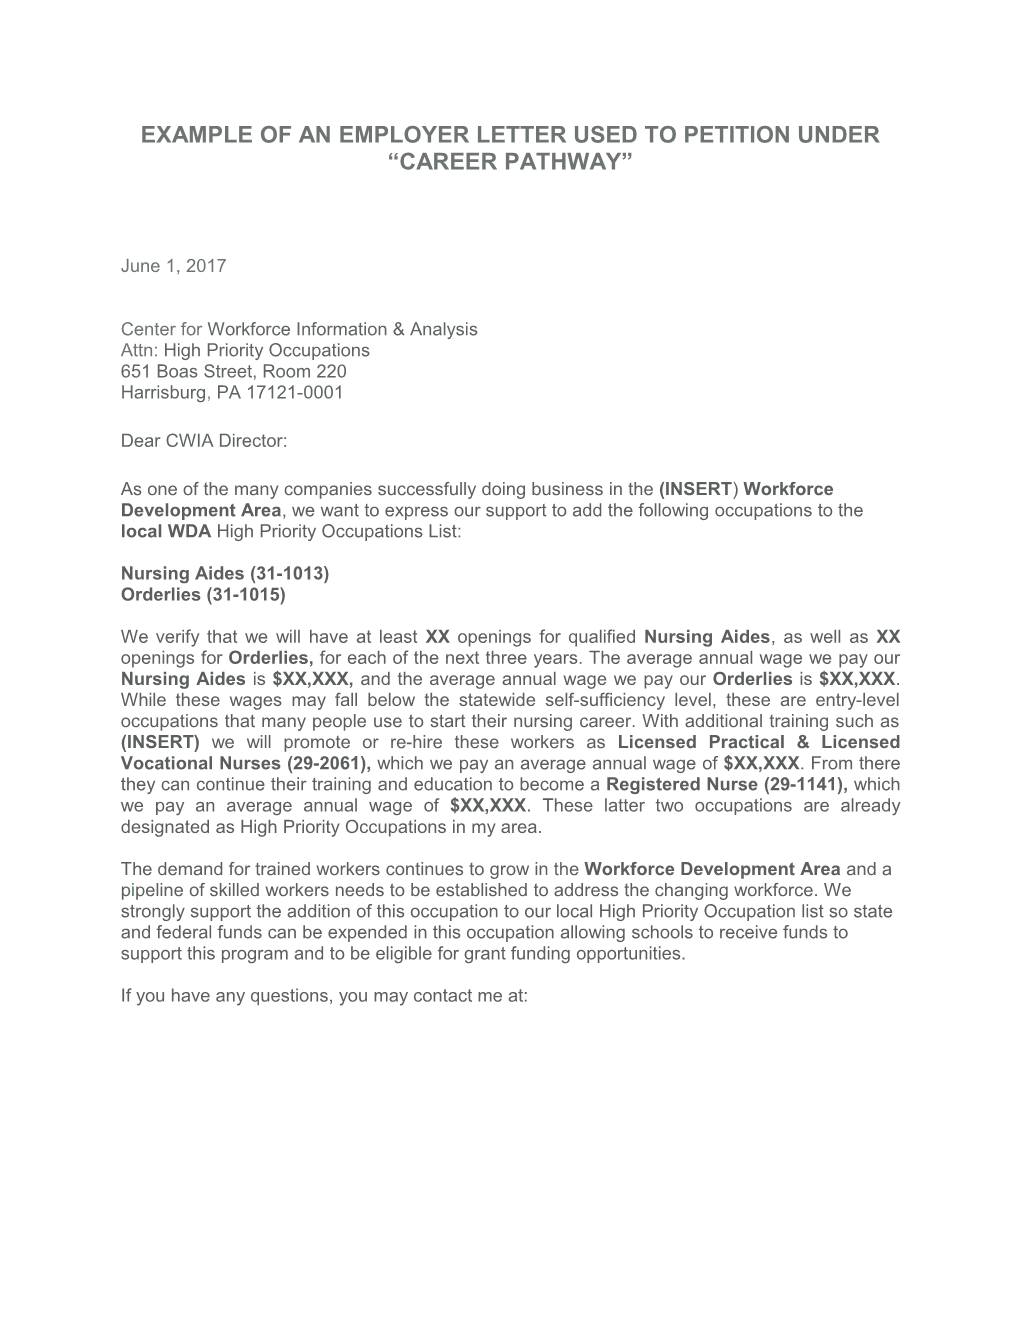 Example of an Employer Letter Used to Petition Under Career Pathway